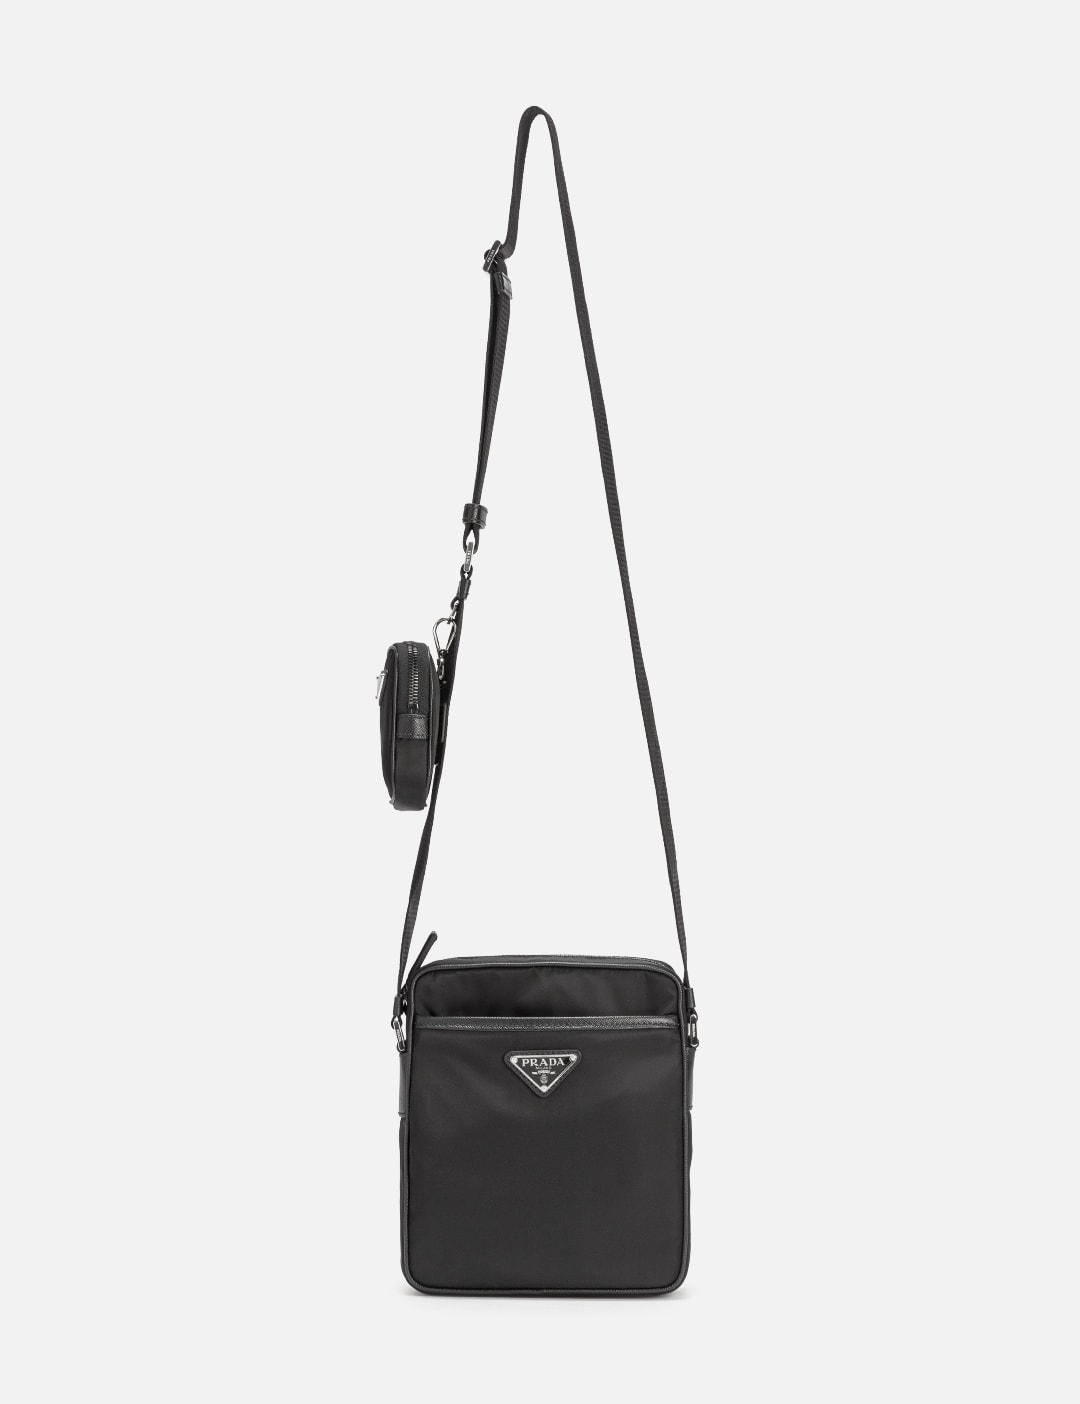 Prada - Mini Pouch Bag | HBX - Globally Curated Fashion and Lifestyle ...